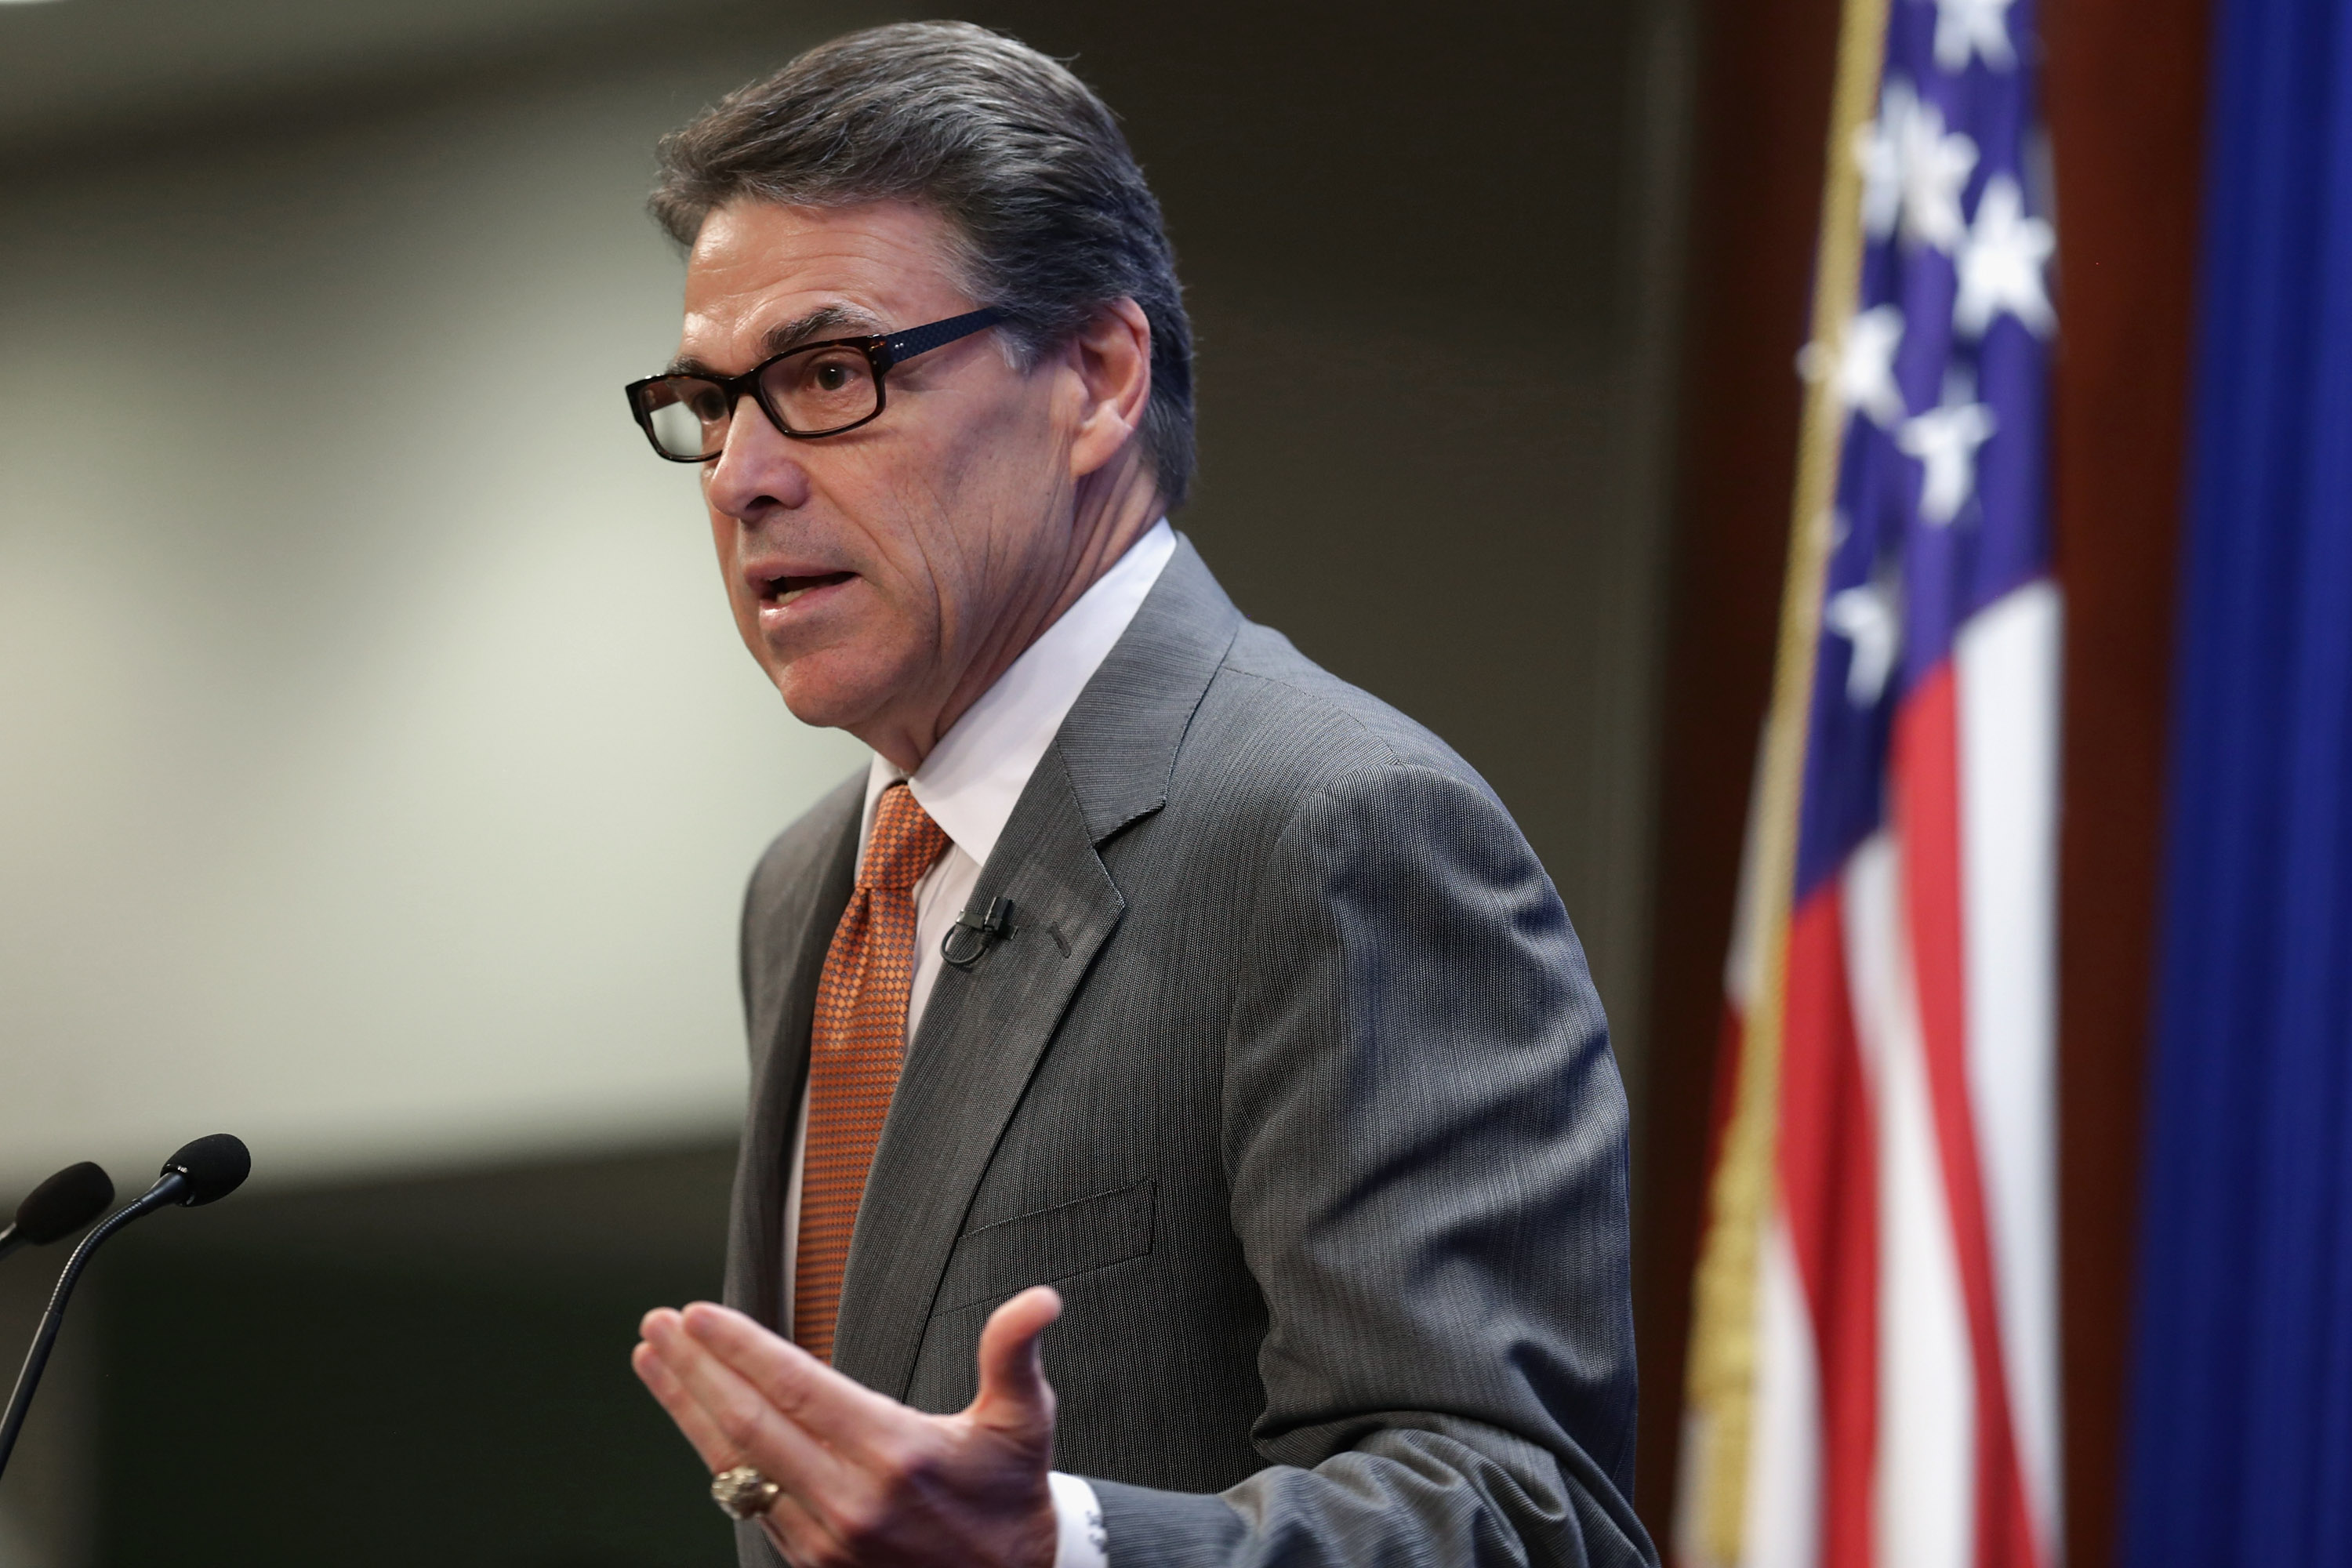 Texas Governor Rick Perry delivers remarks about immigration at The Heritage Foundation August 21, 2014 in Washington, DC. (Chip Somodevilla—Getty Images)